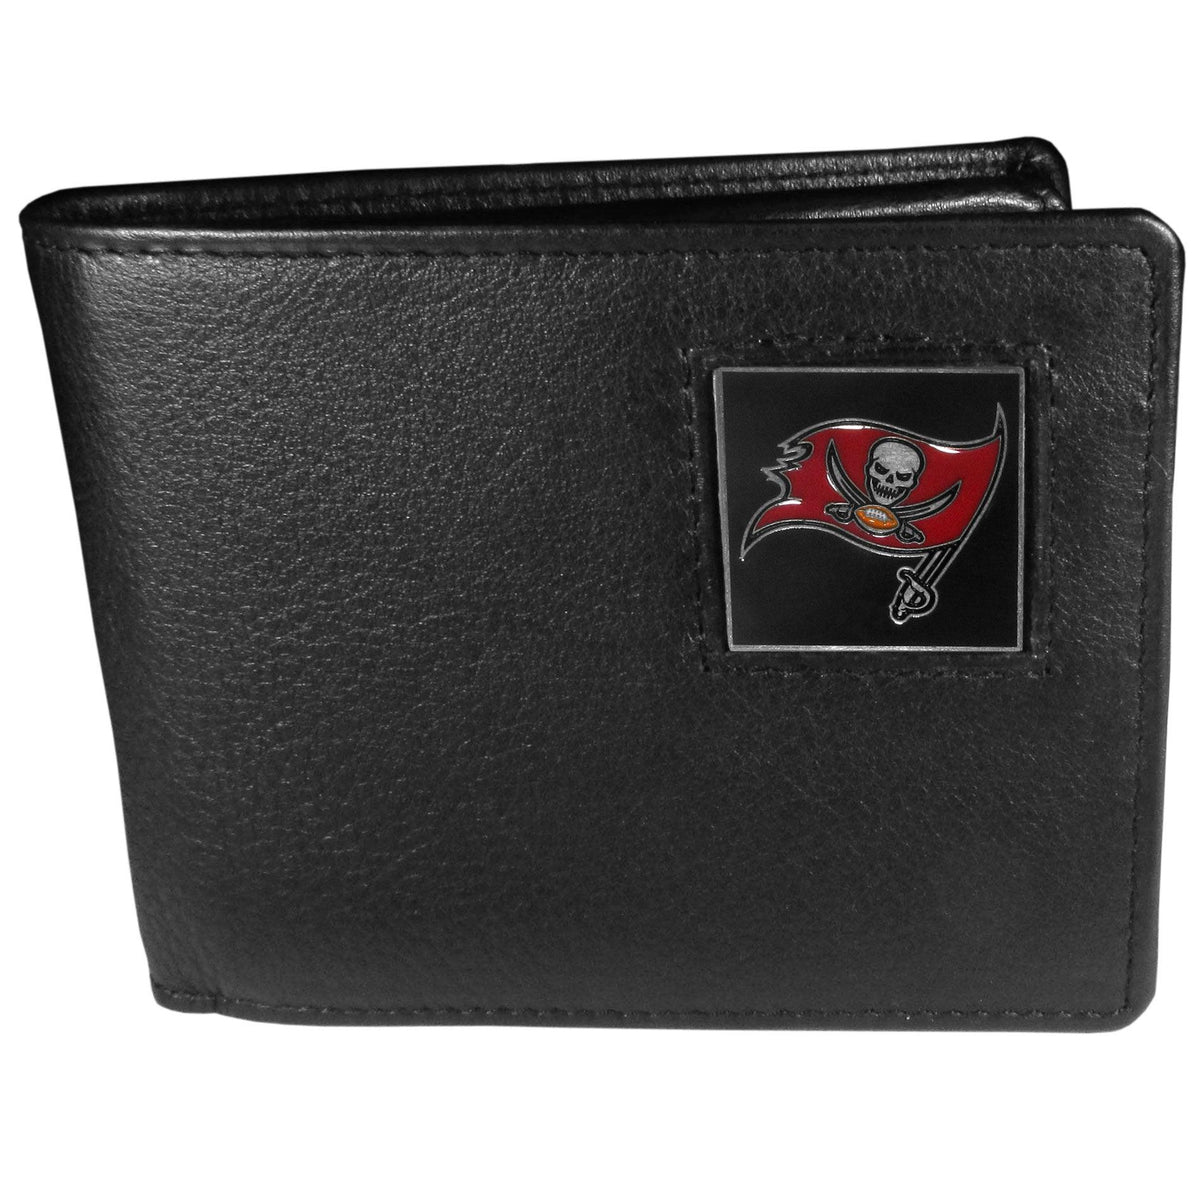 Tampa Bay Buccaneers Leather Bi-fold Wallet Packaged in Gift Box - Flyclothing LLC